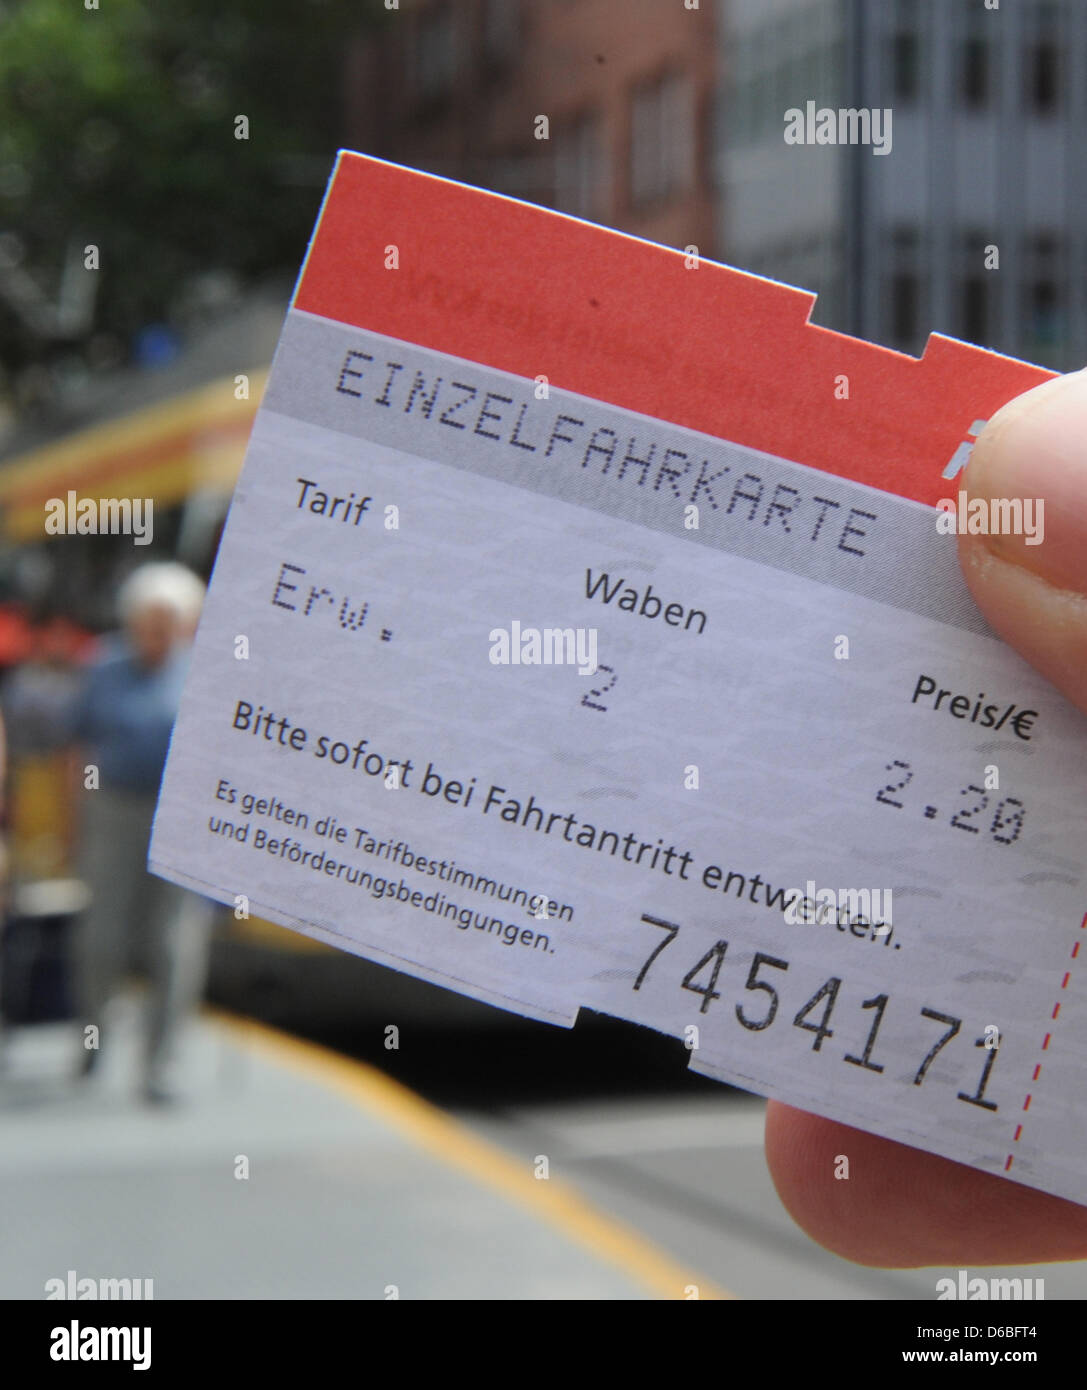 ILLUSTRATION - An illustrated picture shows a single ticket held in front of a street car in downtown Karlsruhe, Germany, 28 August 2012. Ticket prices for busses and streetcars will increase again in south-west Germany. Rising gas prices and sinking numbers of pupils are responsible for the price increases. Photo: Uli Deck Stock Photo